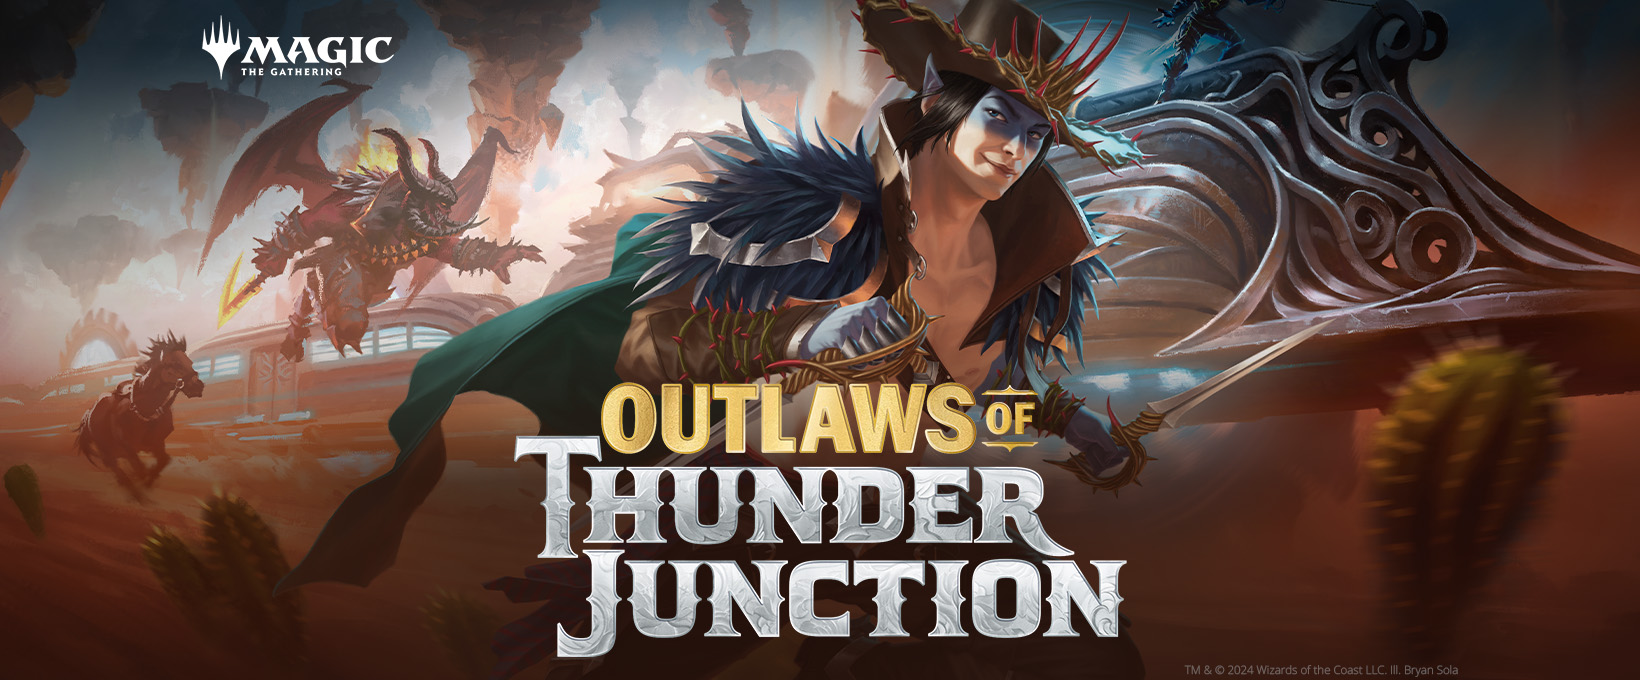 Outlaws of Thunder Junction pre-Release